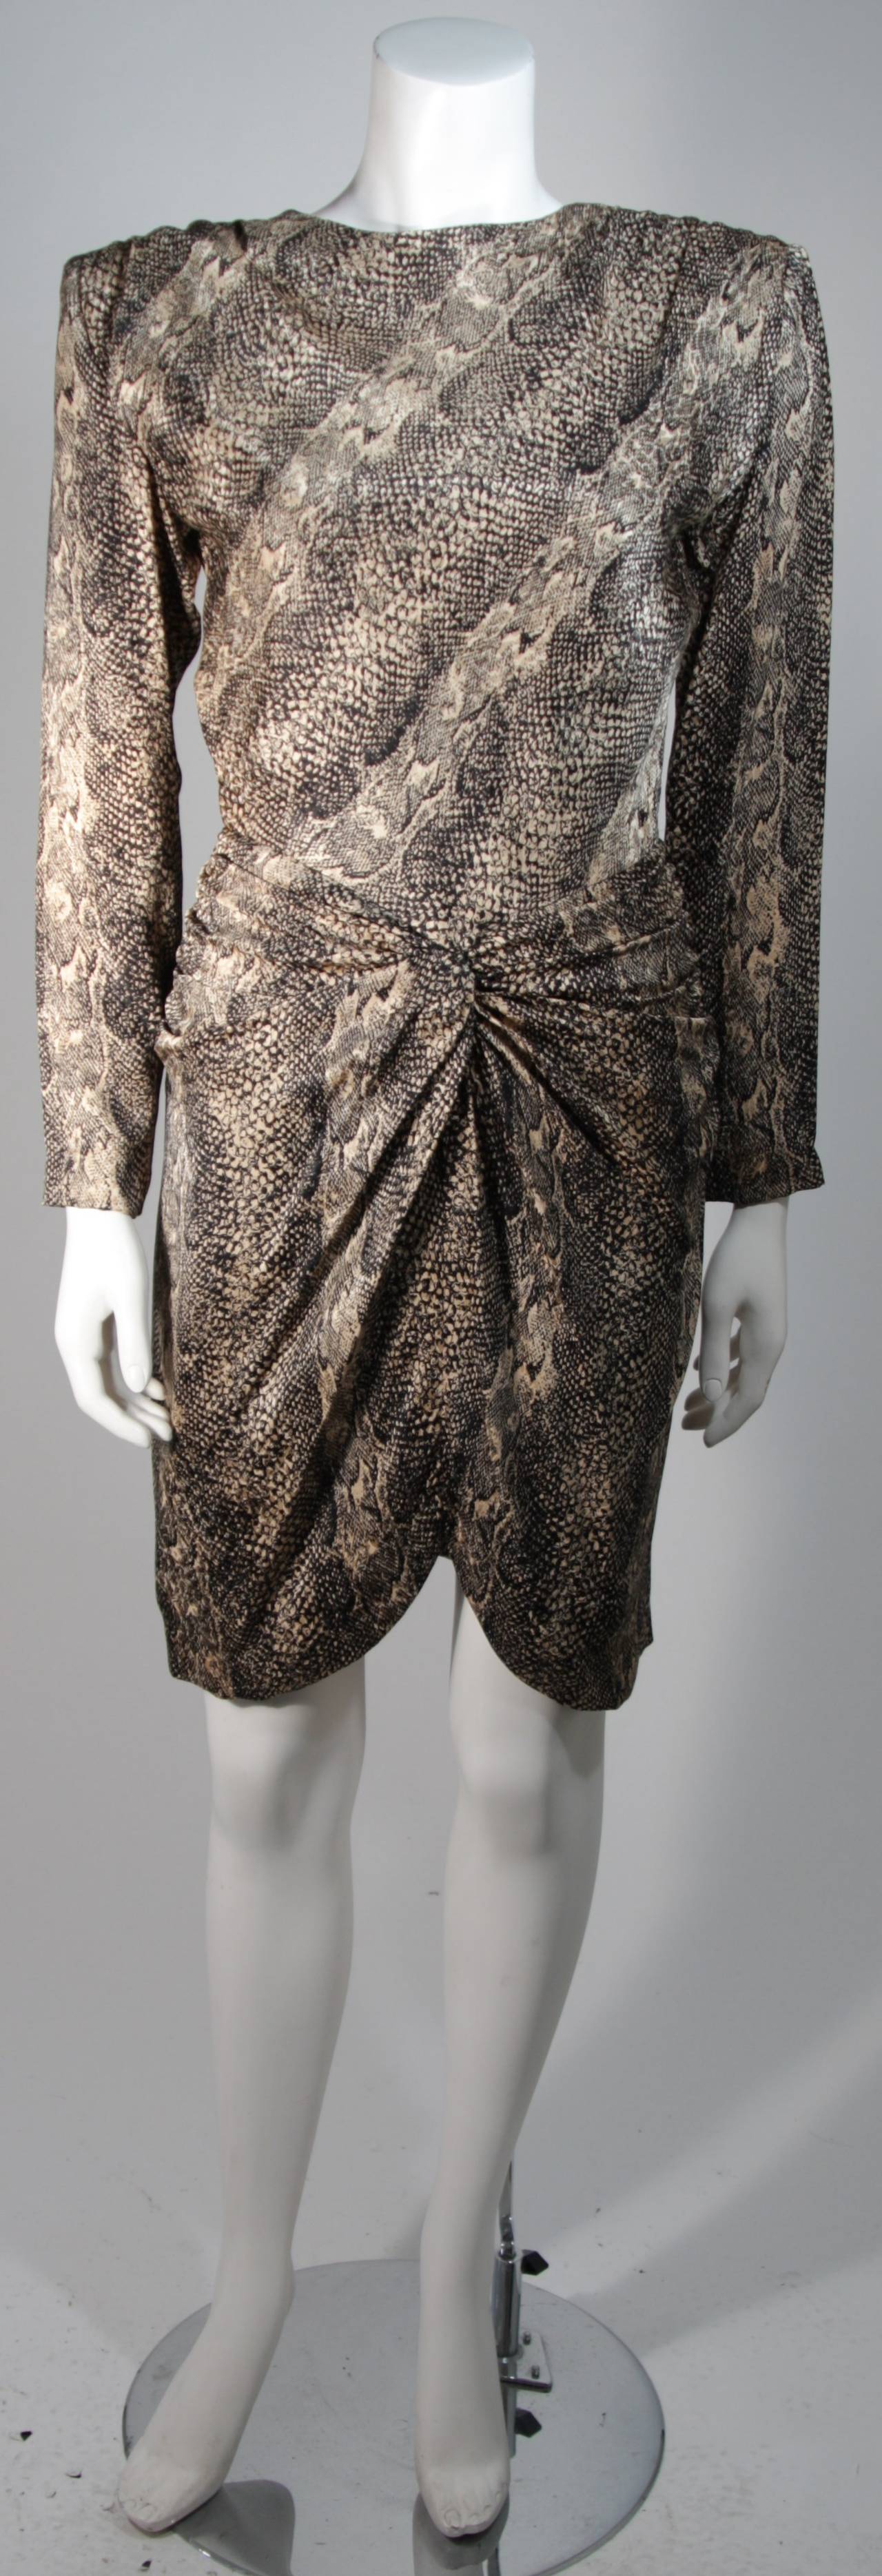 This Vicky Tiel dress is composed of a brown and black silk with snakeskin print. There is draping at the hip and a center back zipper closure. In excellent condition. Made in France.

This item is from the personal estate of Shirlee